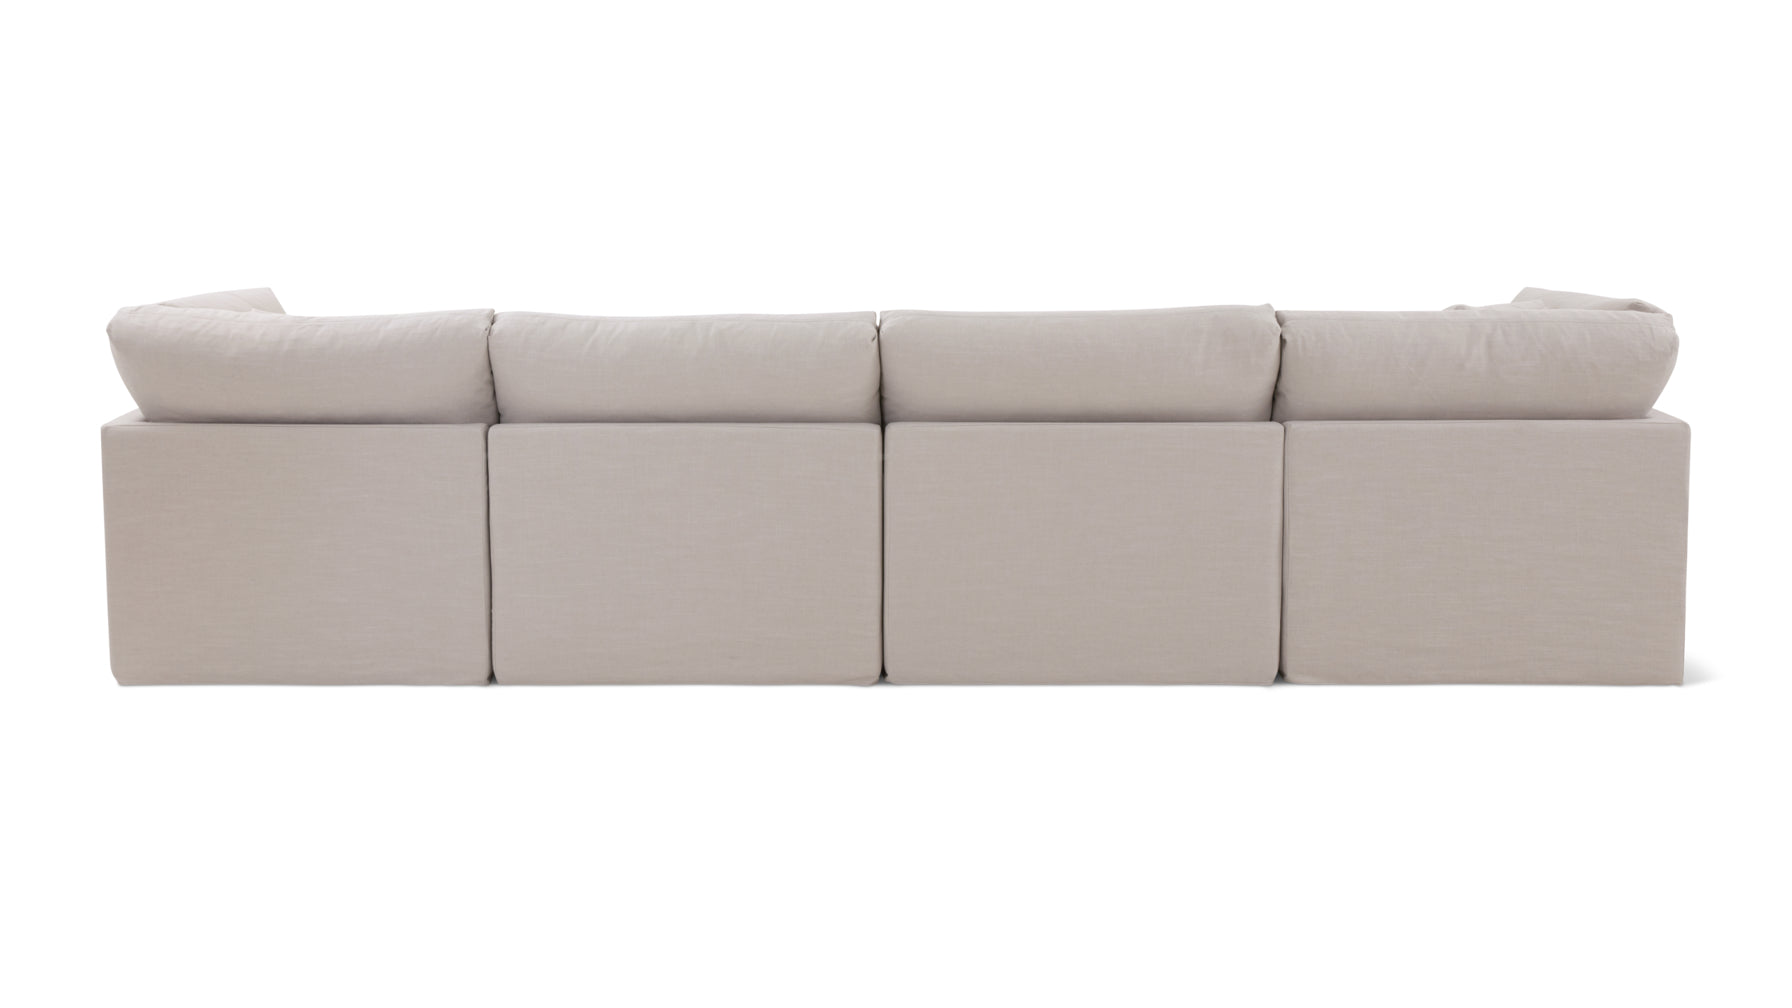 Get Together™ 6-Piece Modular U-Shaped Sectional, Standard, Clay - Image 7